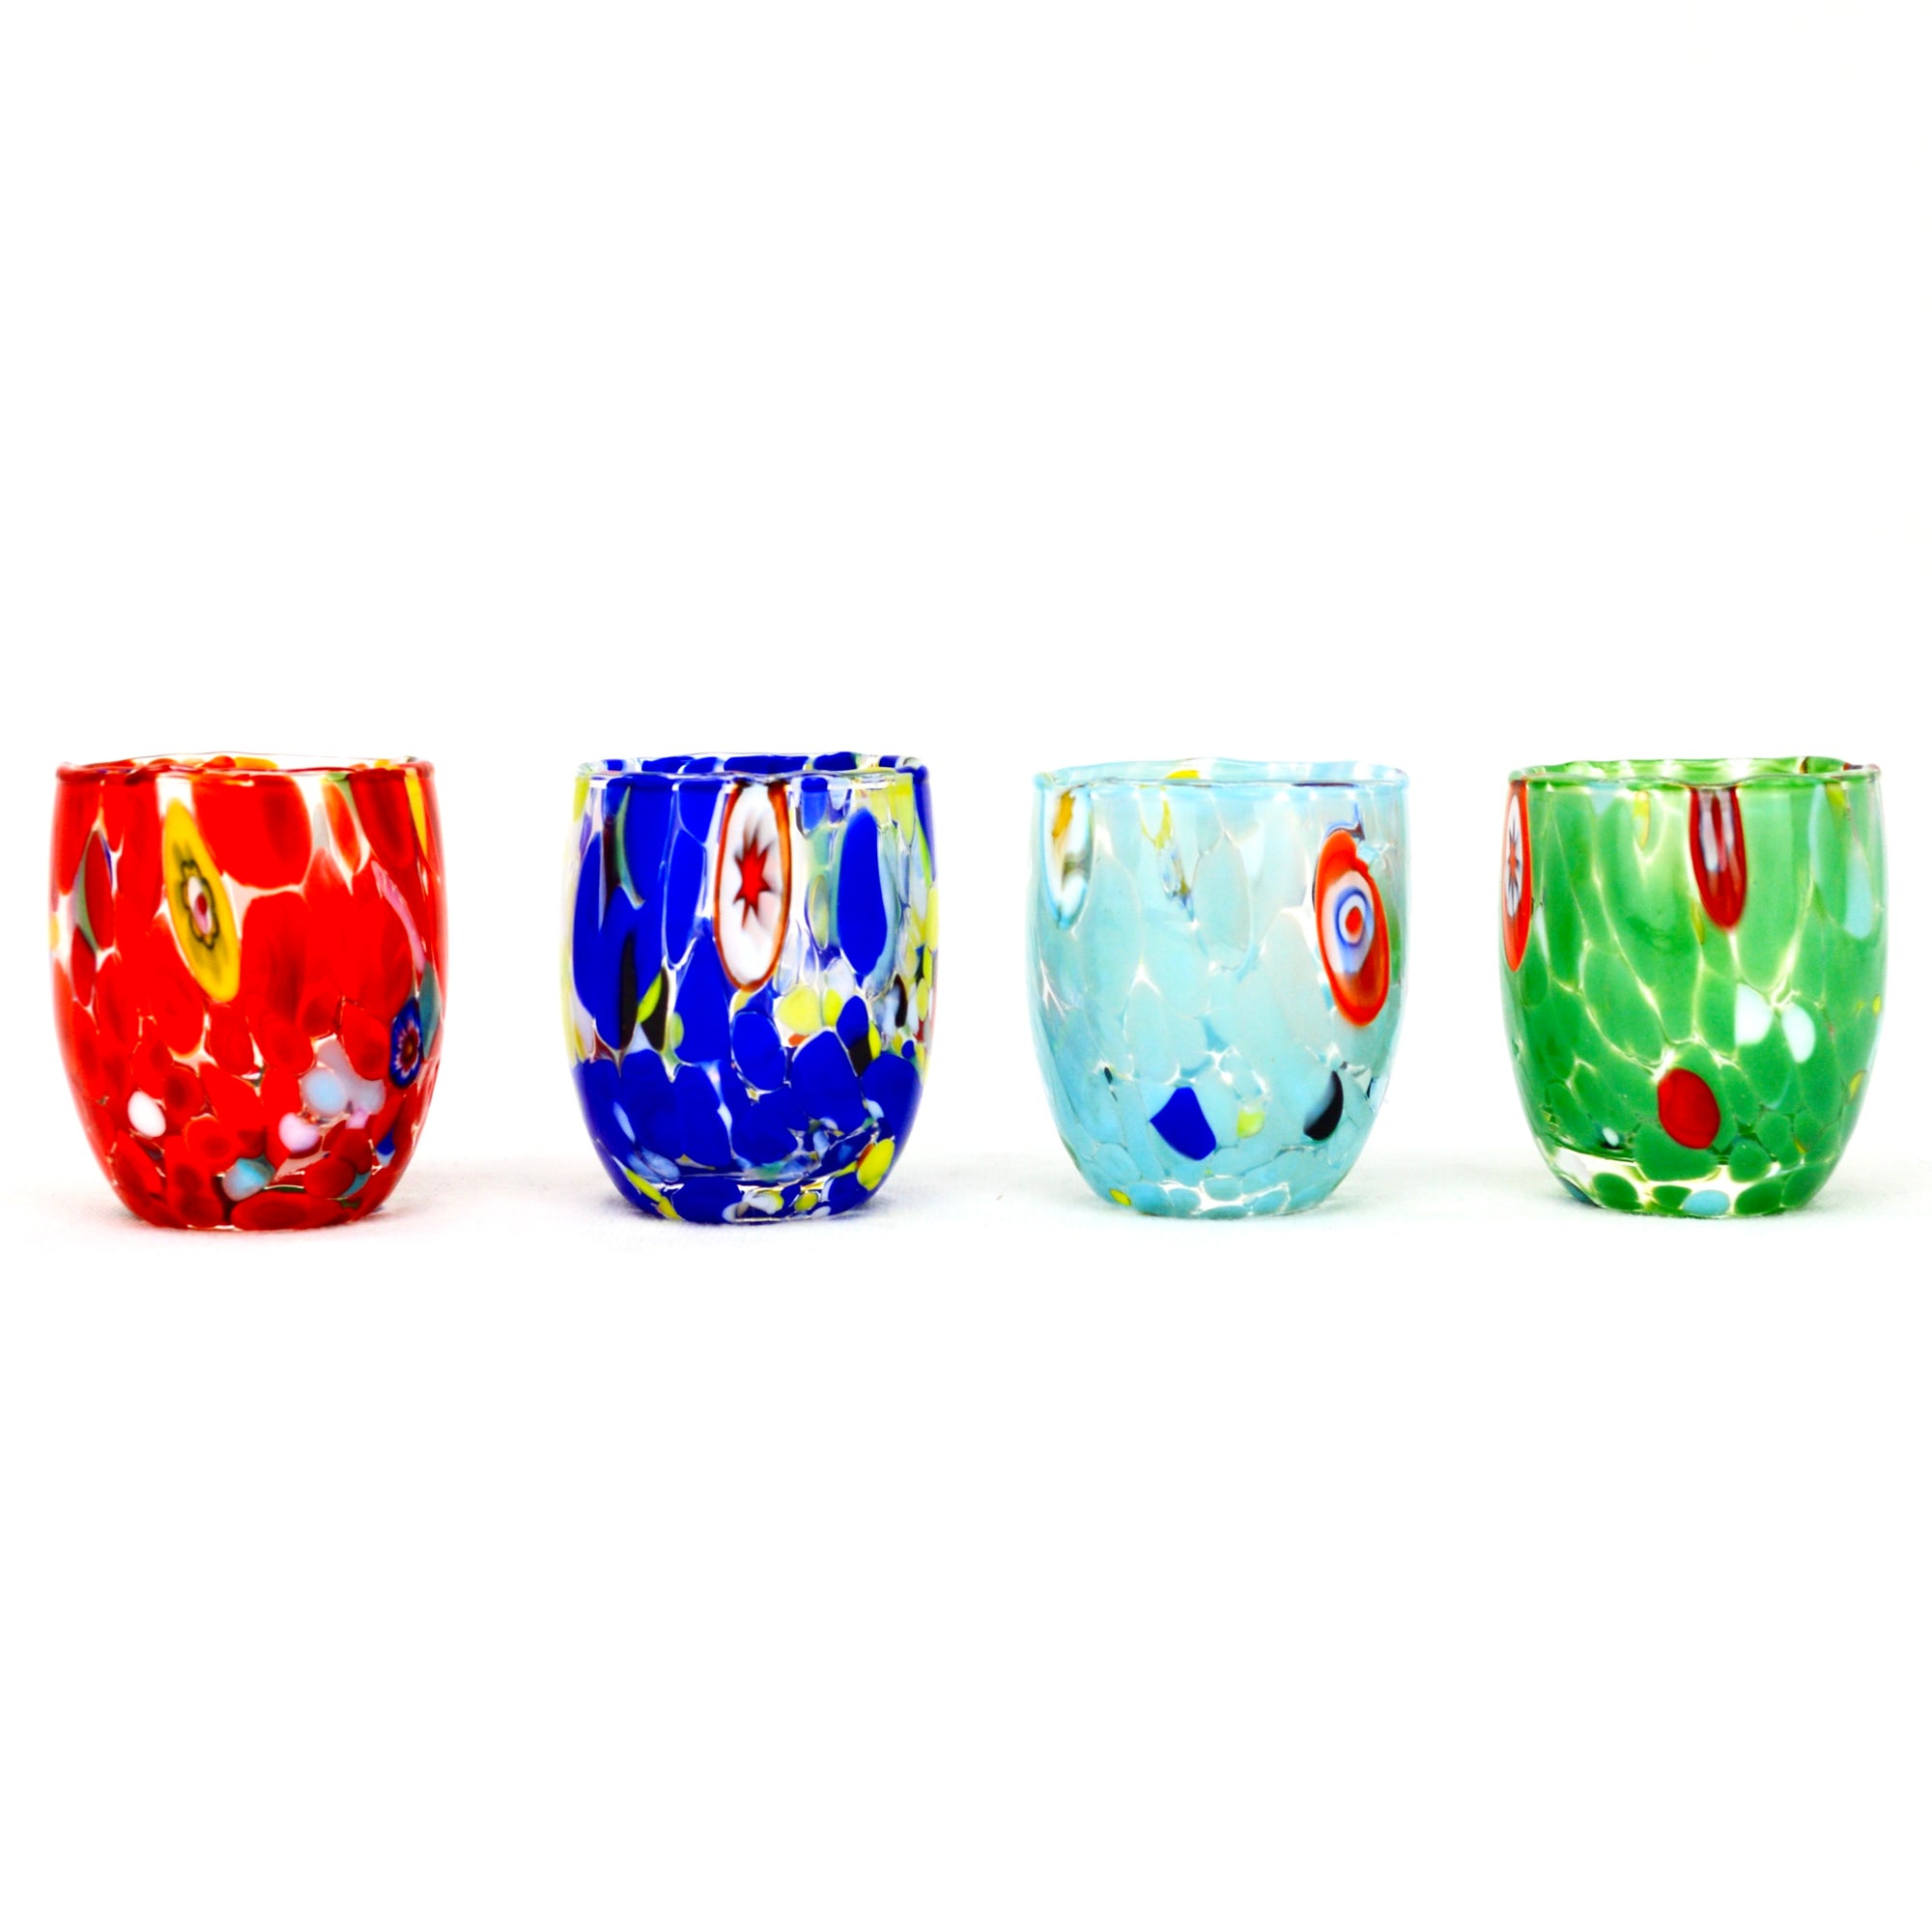 Contemporary Shot Glasses, Set of 4, Hand Painted Crystal, Made in Italy - My Italian Decor